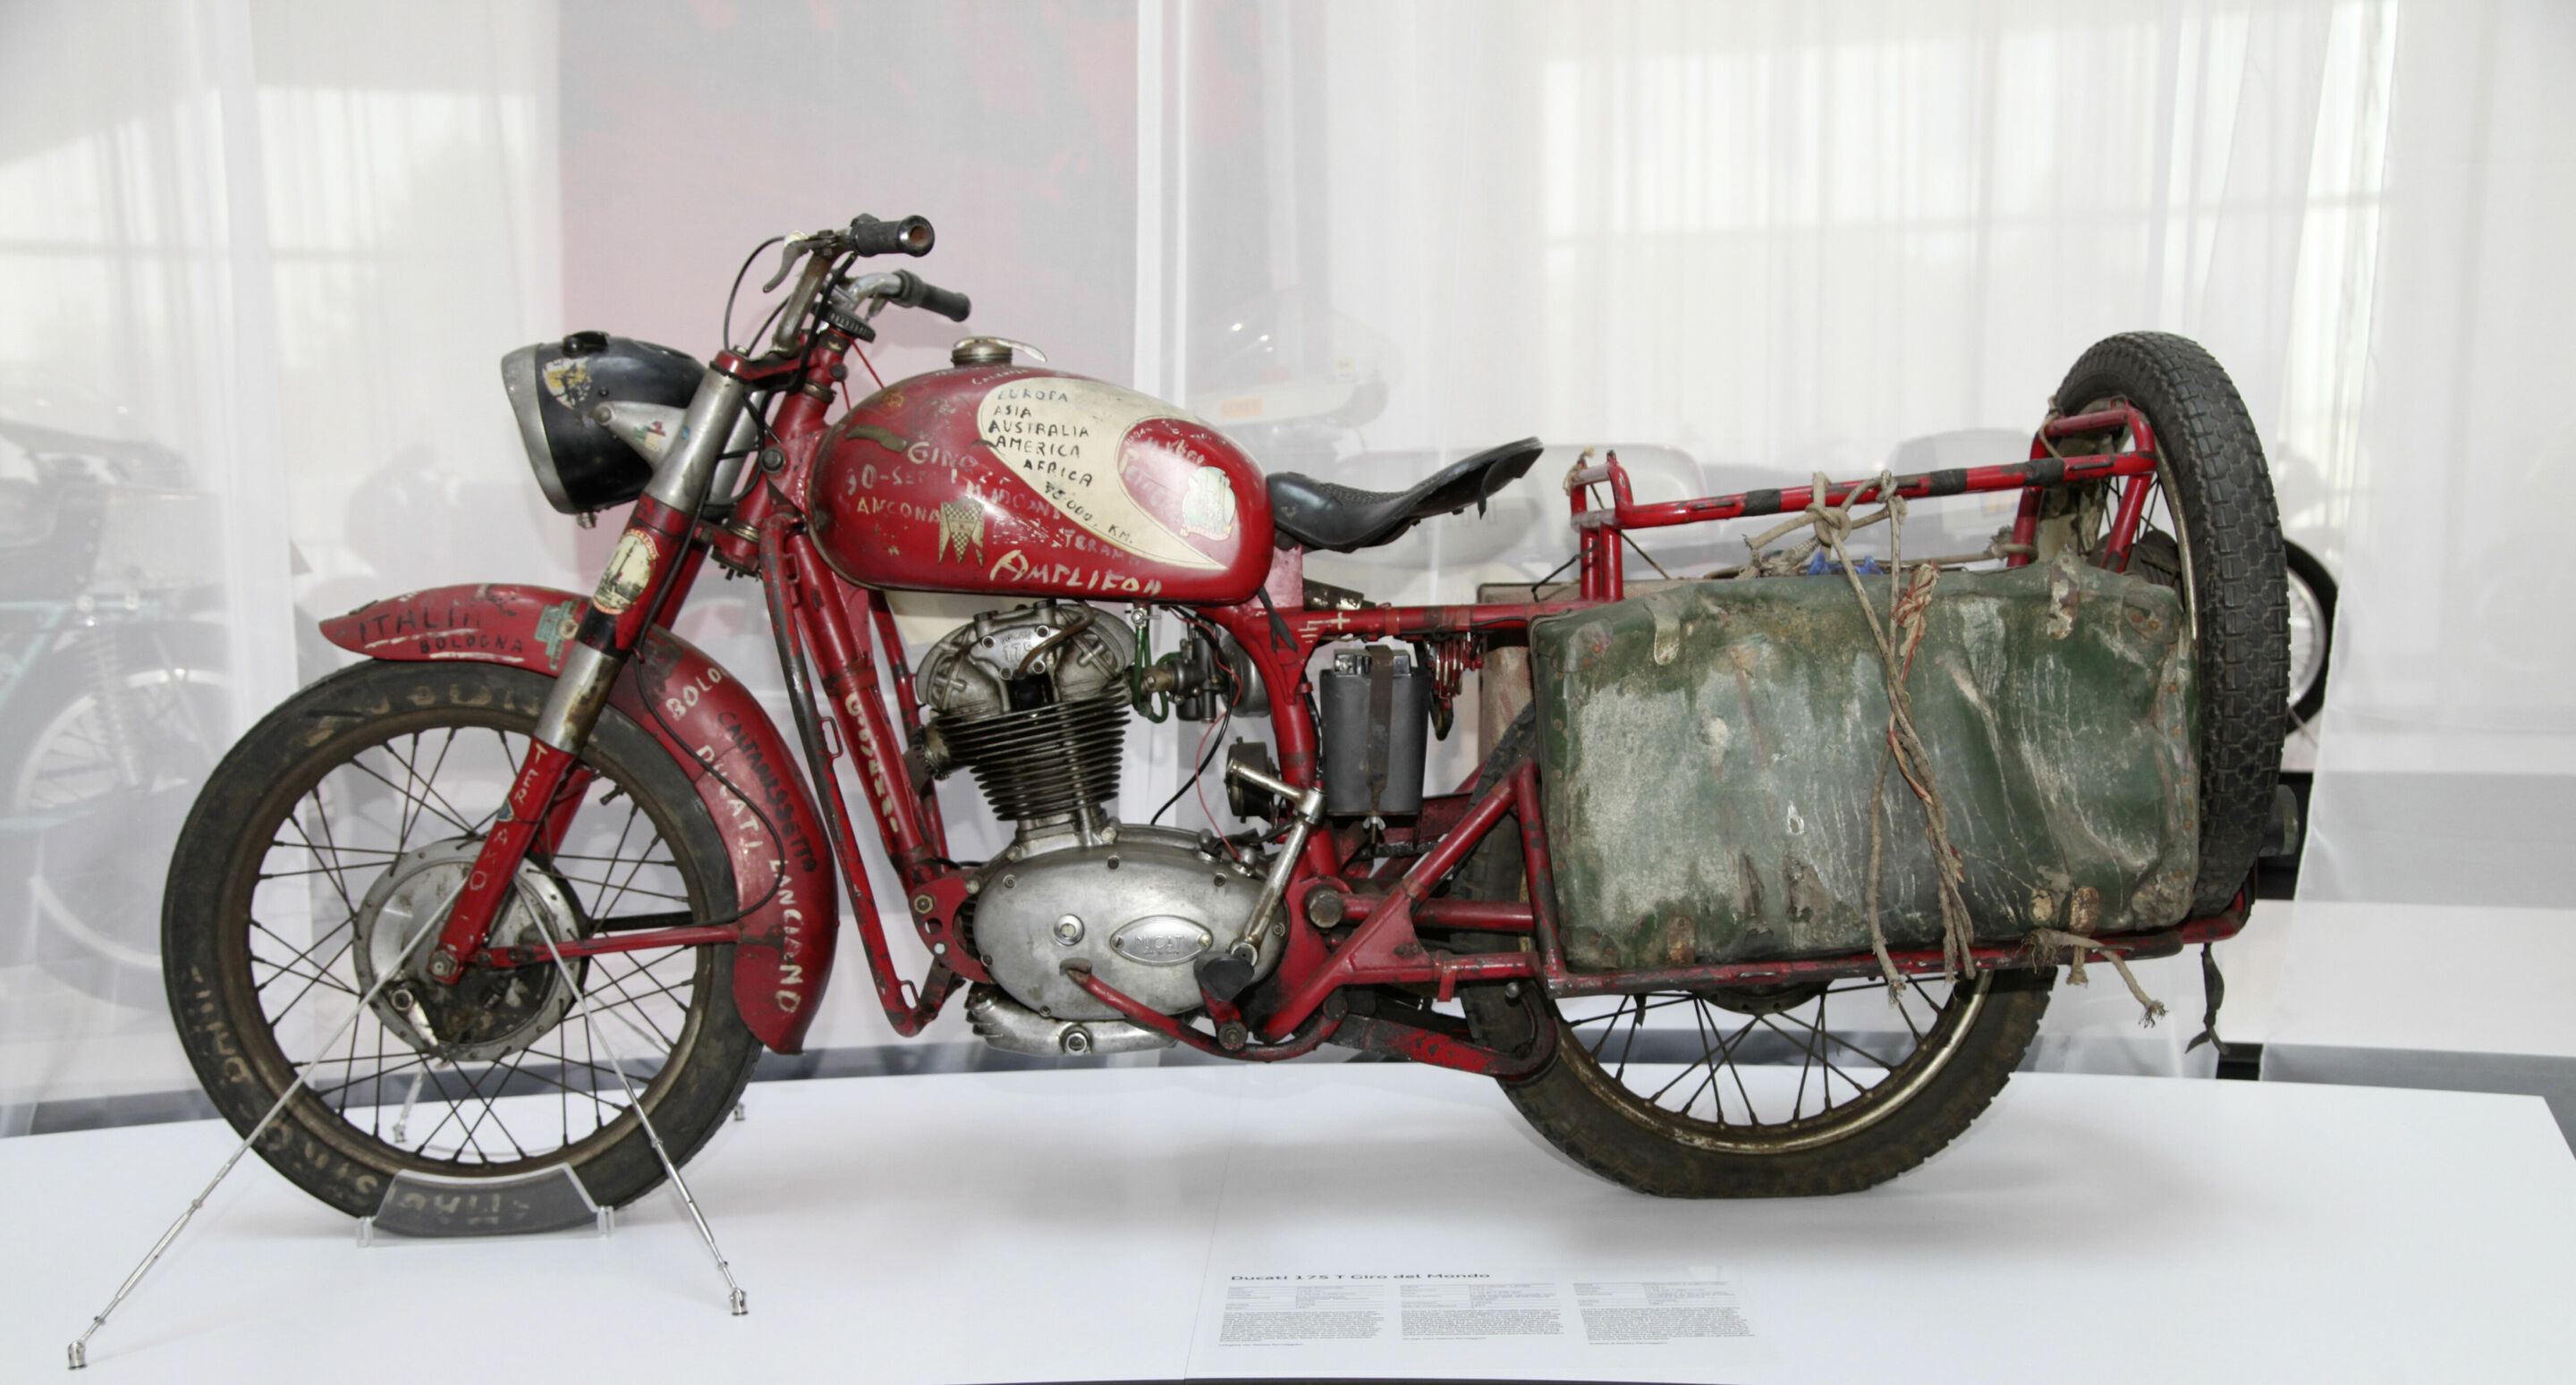 Ducati's passion on show at Audi museum mobile